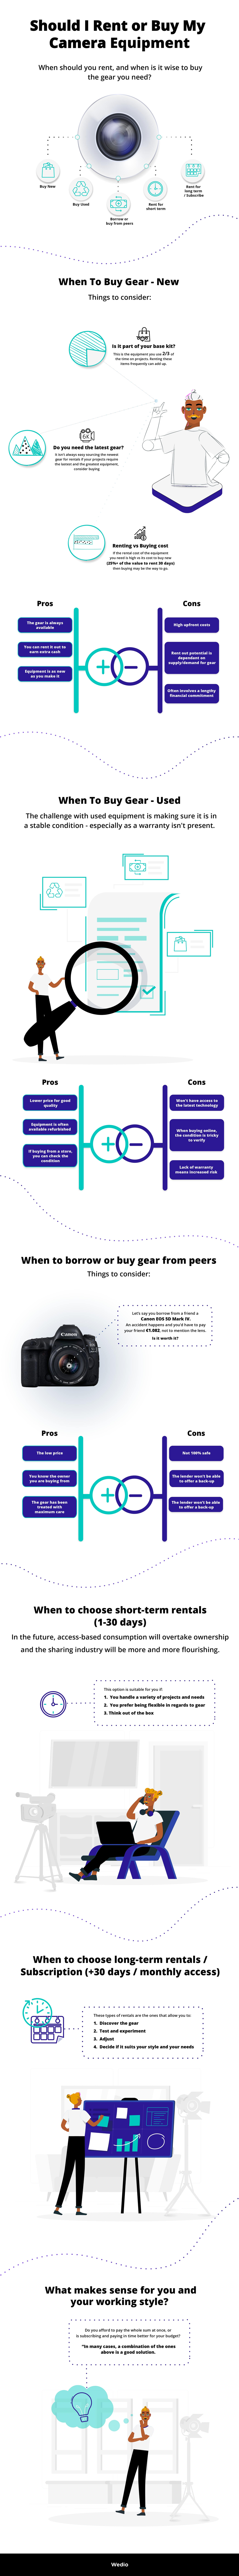 An infographic of when to rent and buy your camera equipment.